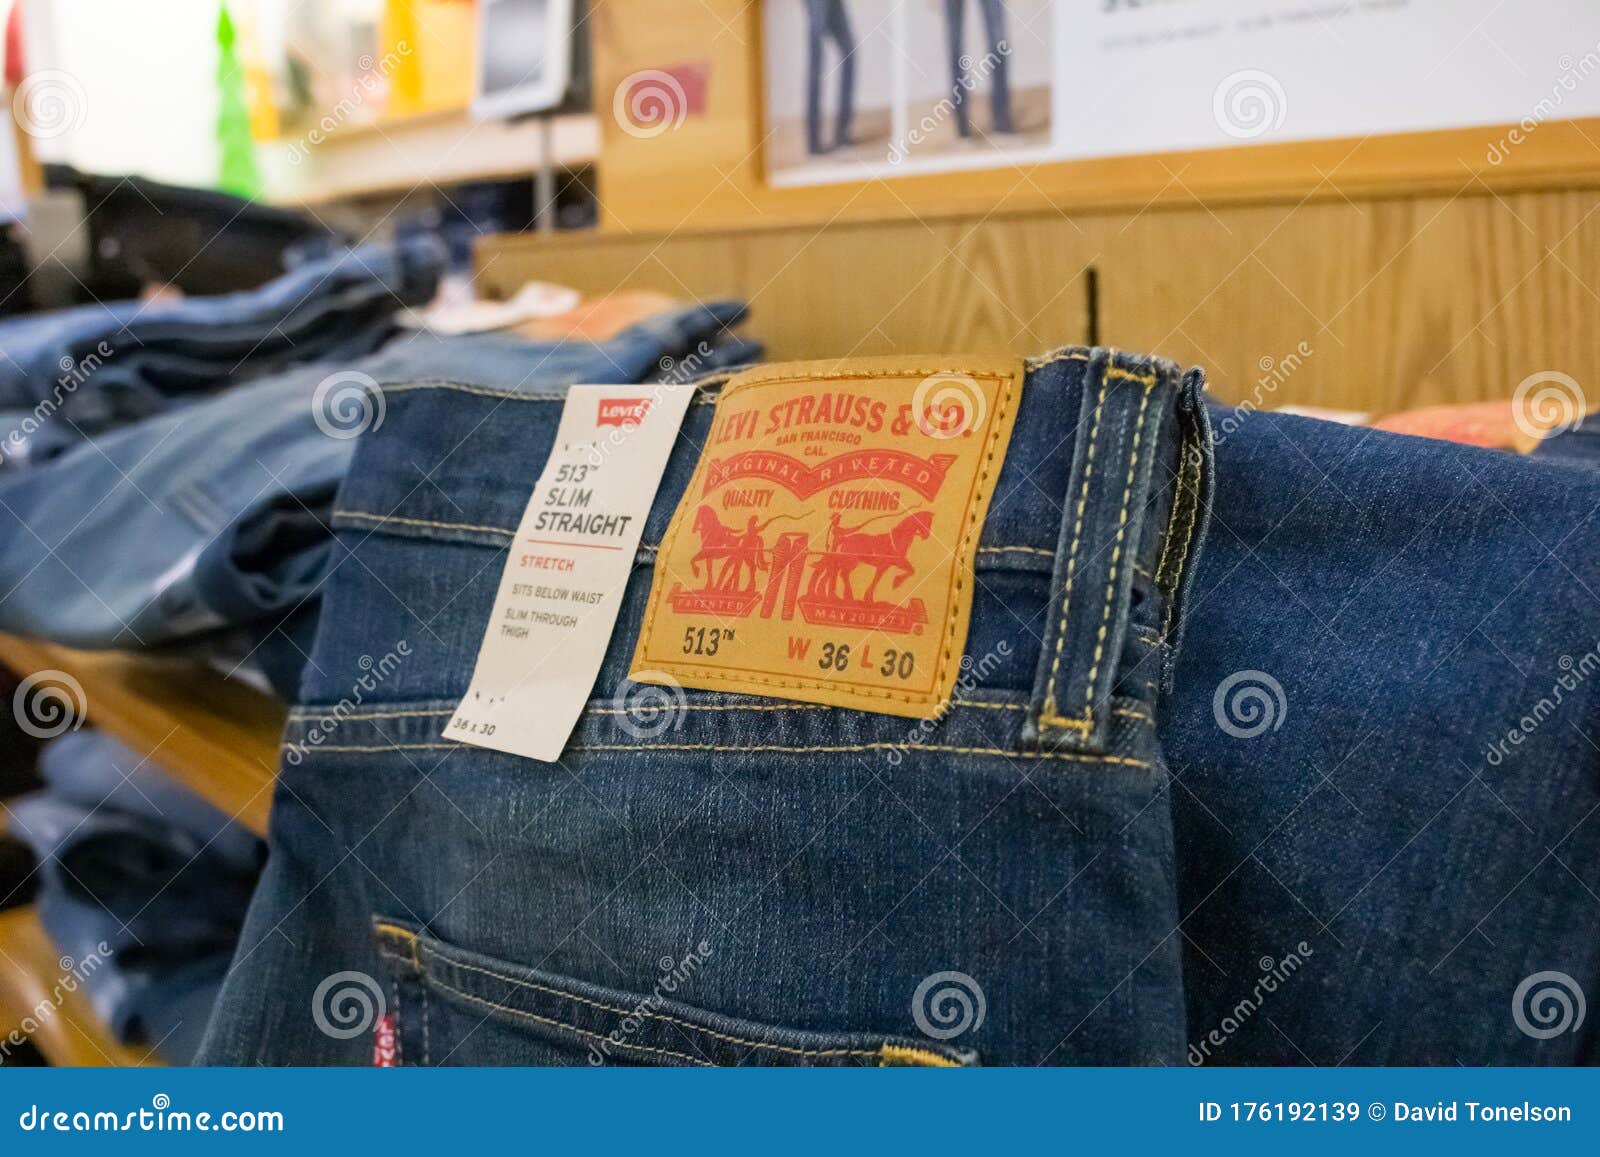 Levis pants and tag editorial stock image. Image of name - 176192139